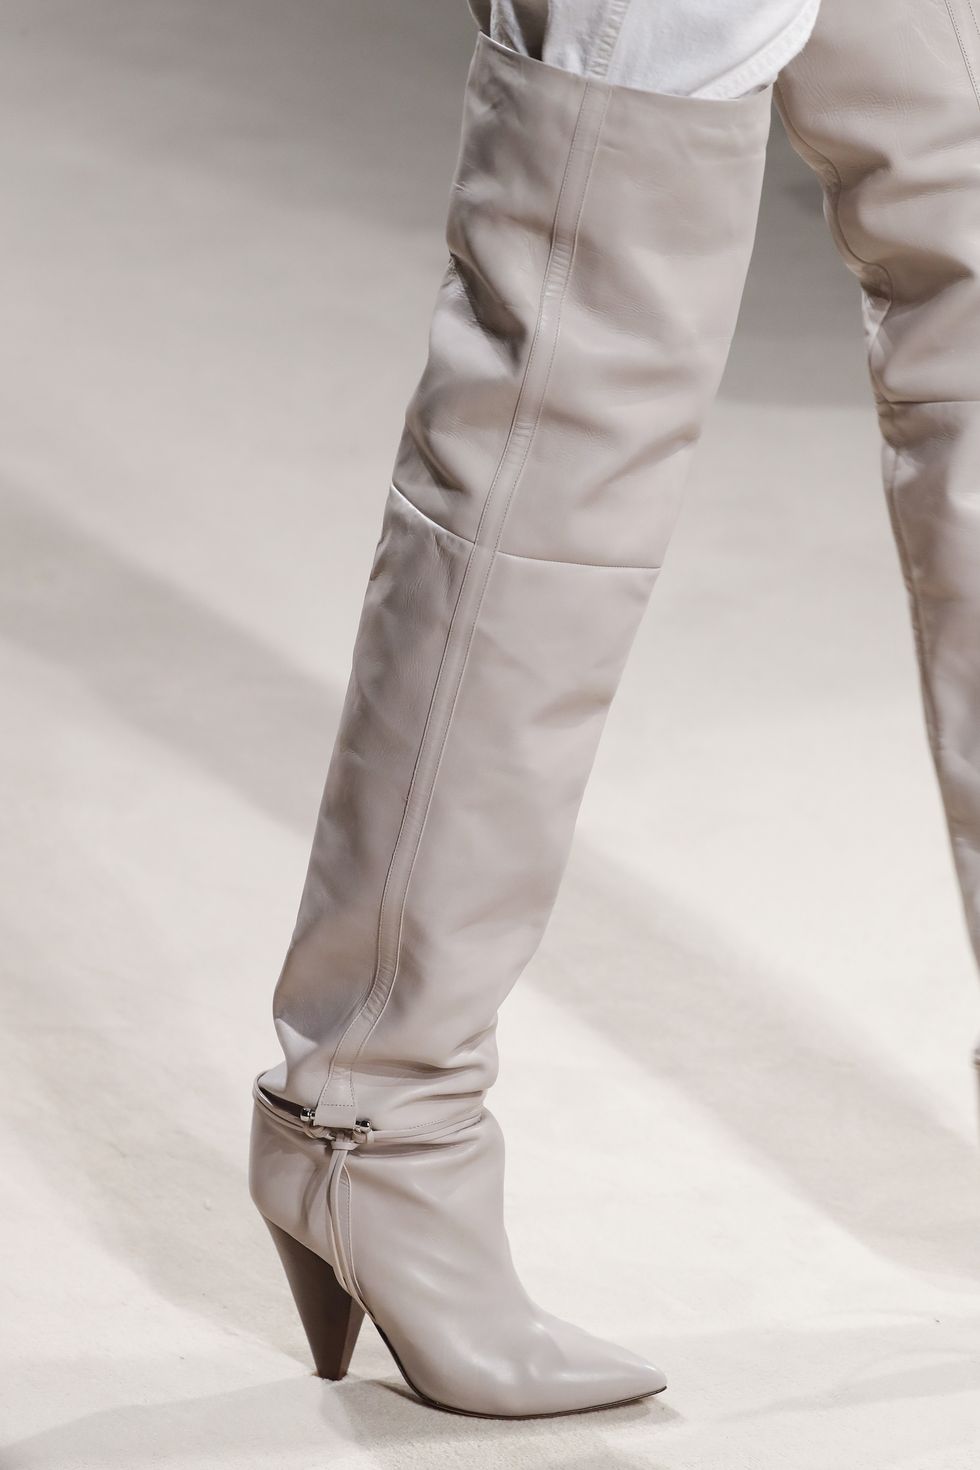 Winter Shoe Trends 2023-2024 - the gray details